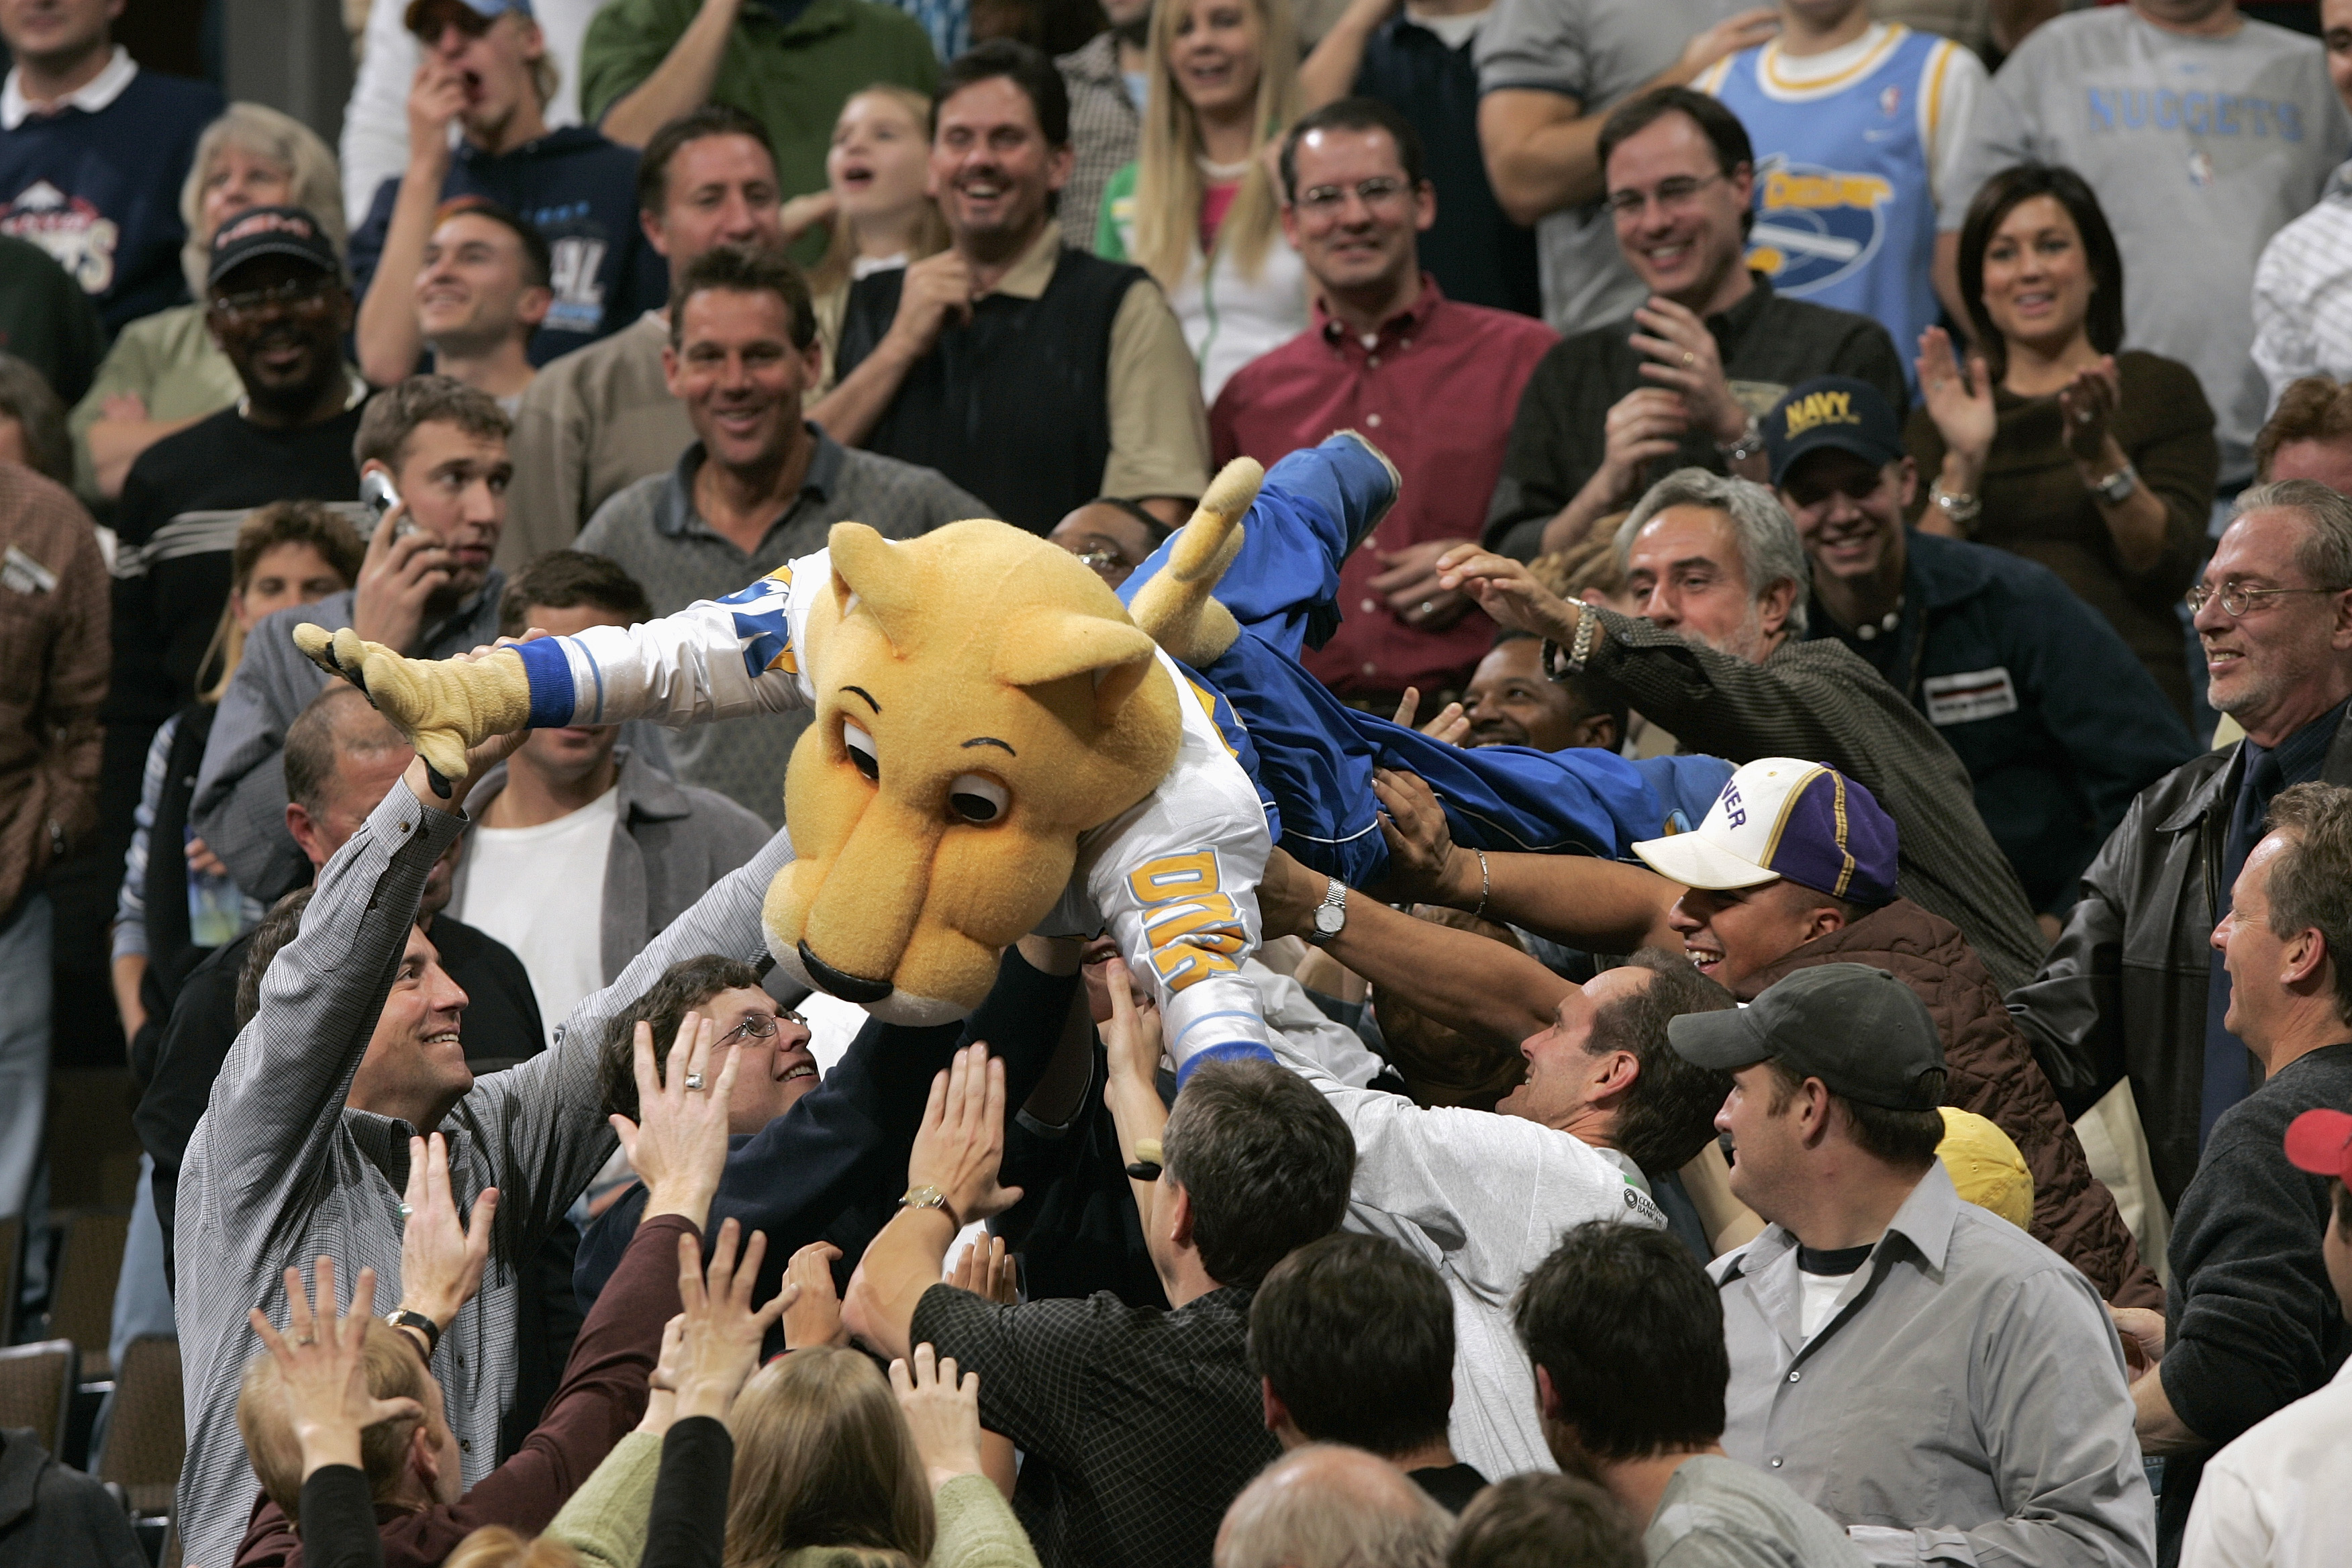 DENVER - NOVEMBER 11:  The Denver Nuggets mascot surfs the crowd during the game with the Detroit Pistons on November 11, 2004 at the Pepsi Center in Denver, Colorado.  The Nuggets won 117-109.    NOTE TO USER: User expressly acknowledges and agrees that,